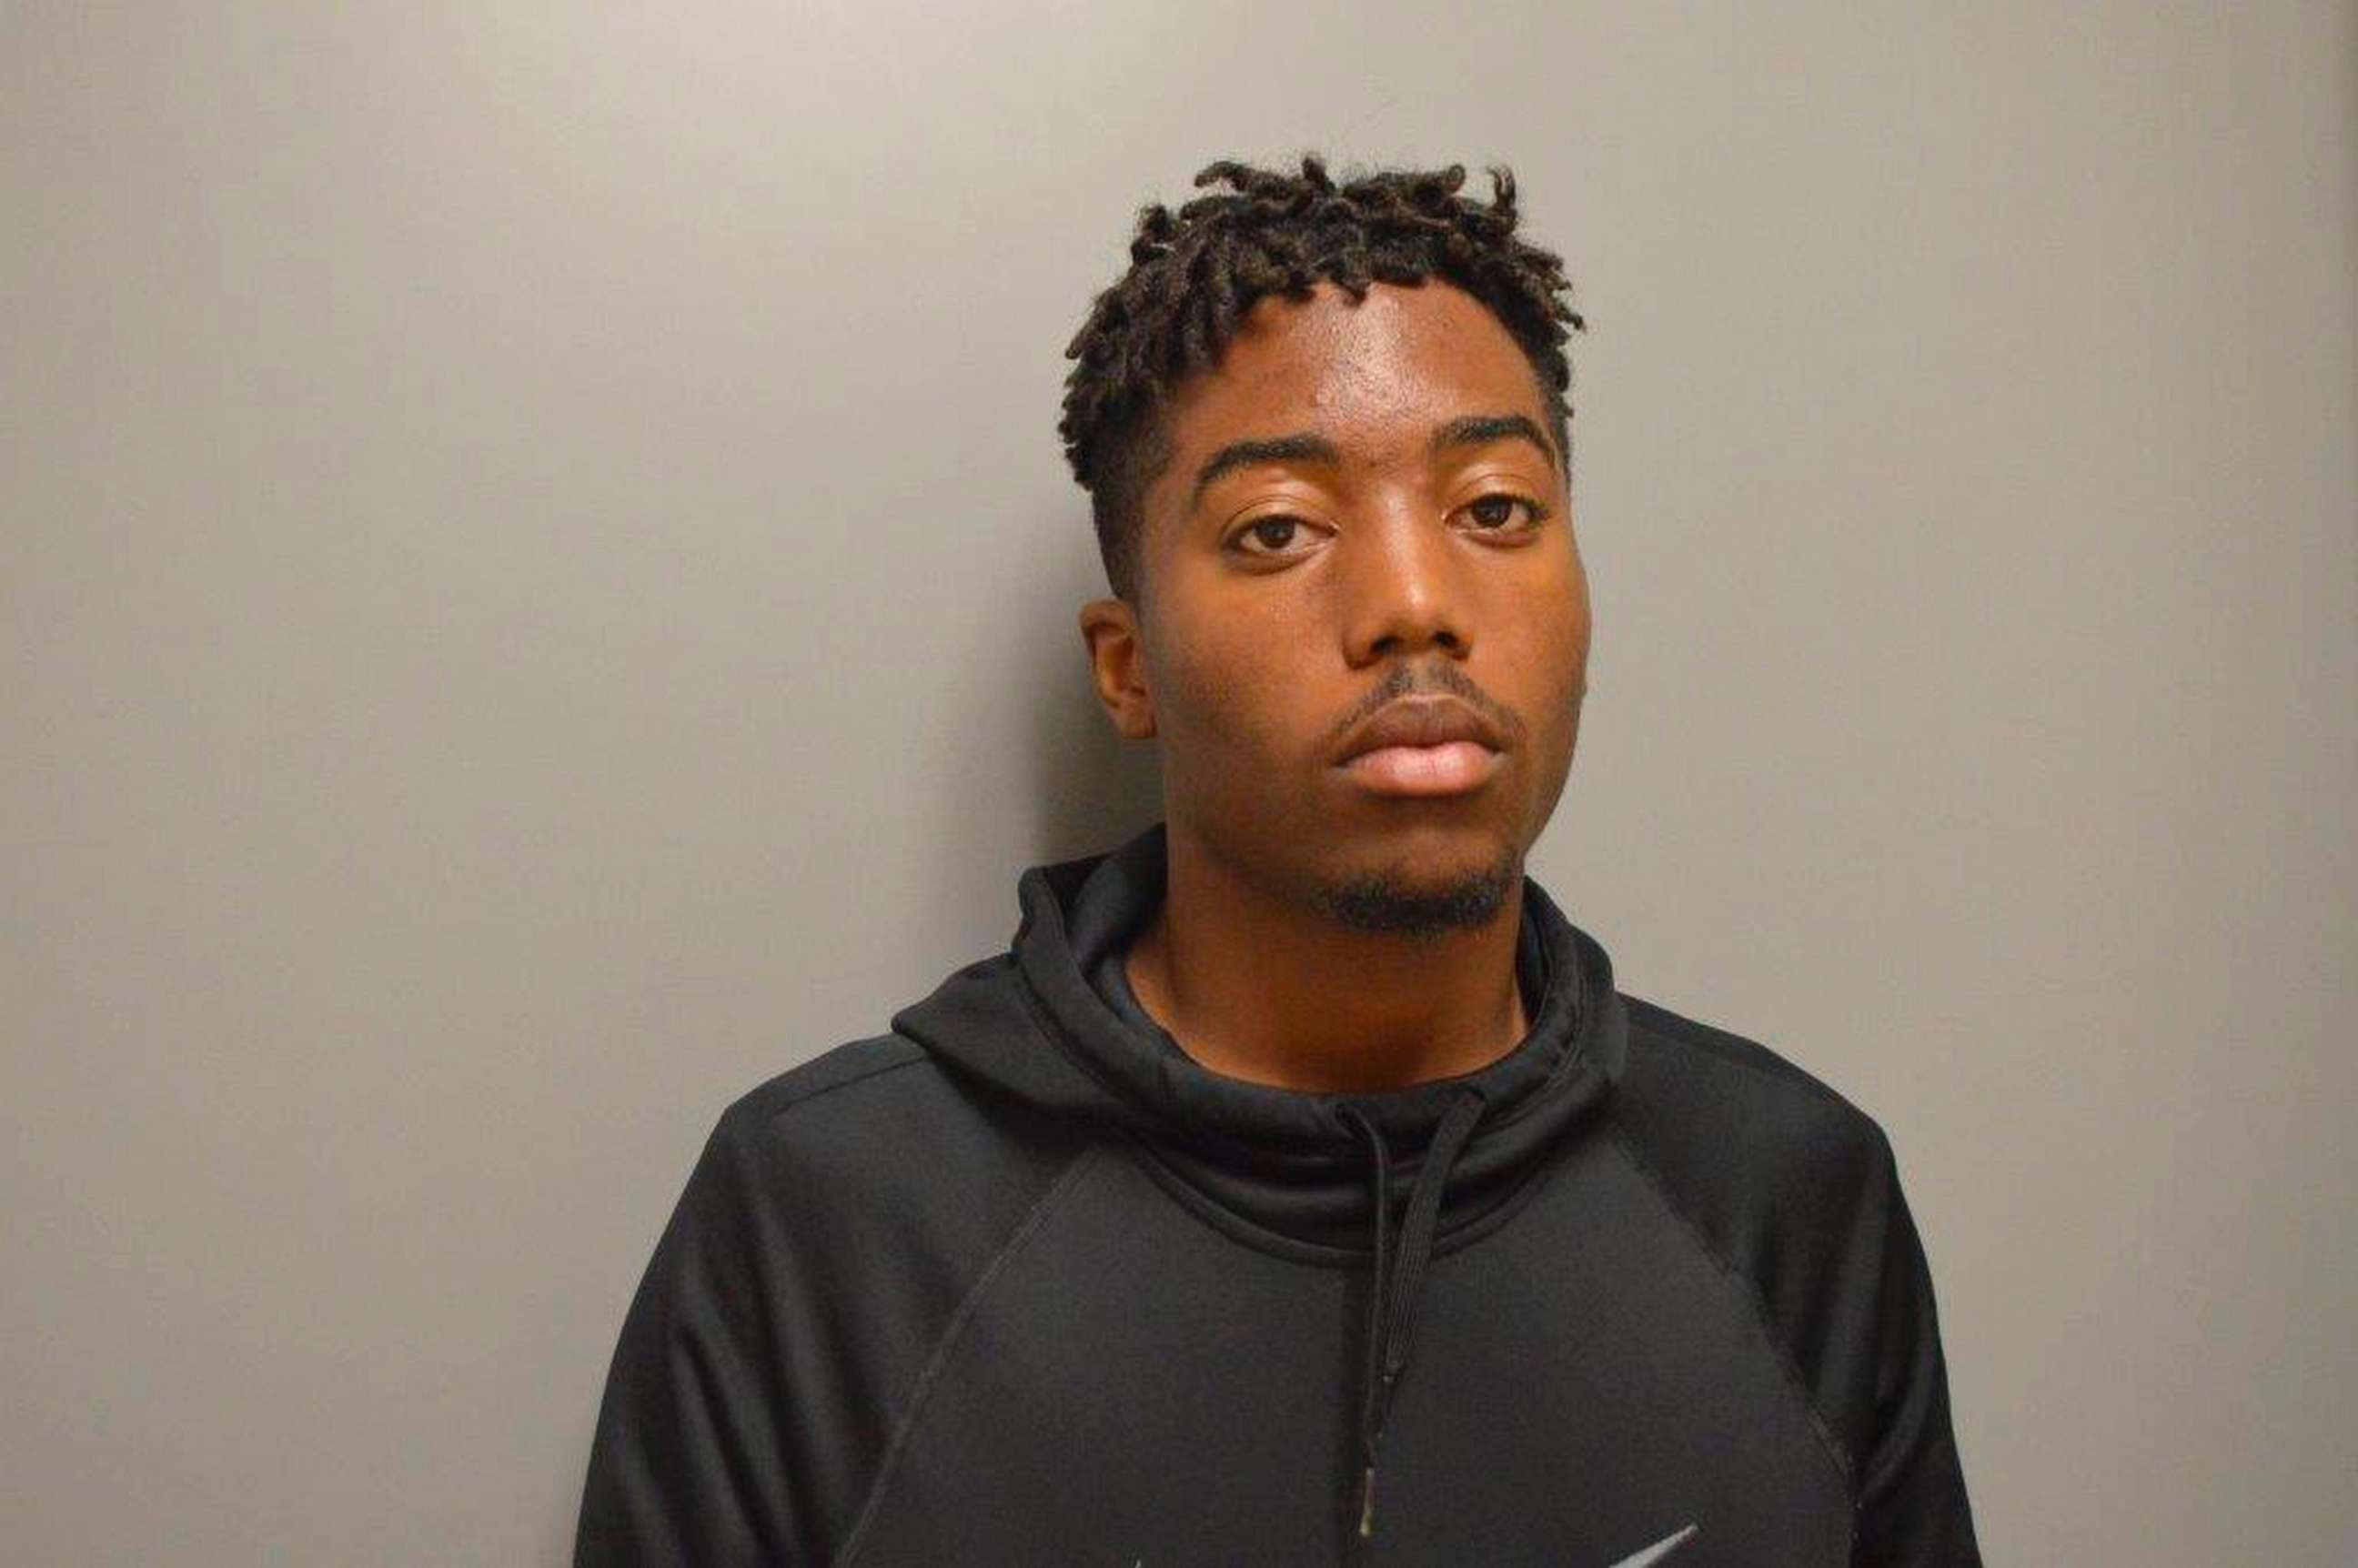 PHOTO: This booking photo released by the Manteca Police Department shows suspect 18-year-old Tyrone McAllister, Aug. 8, 2018.